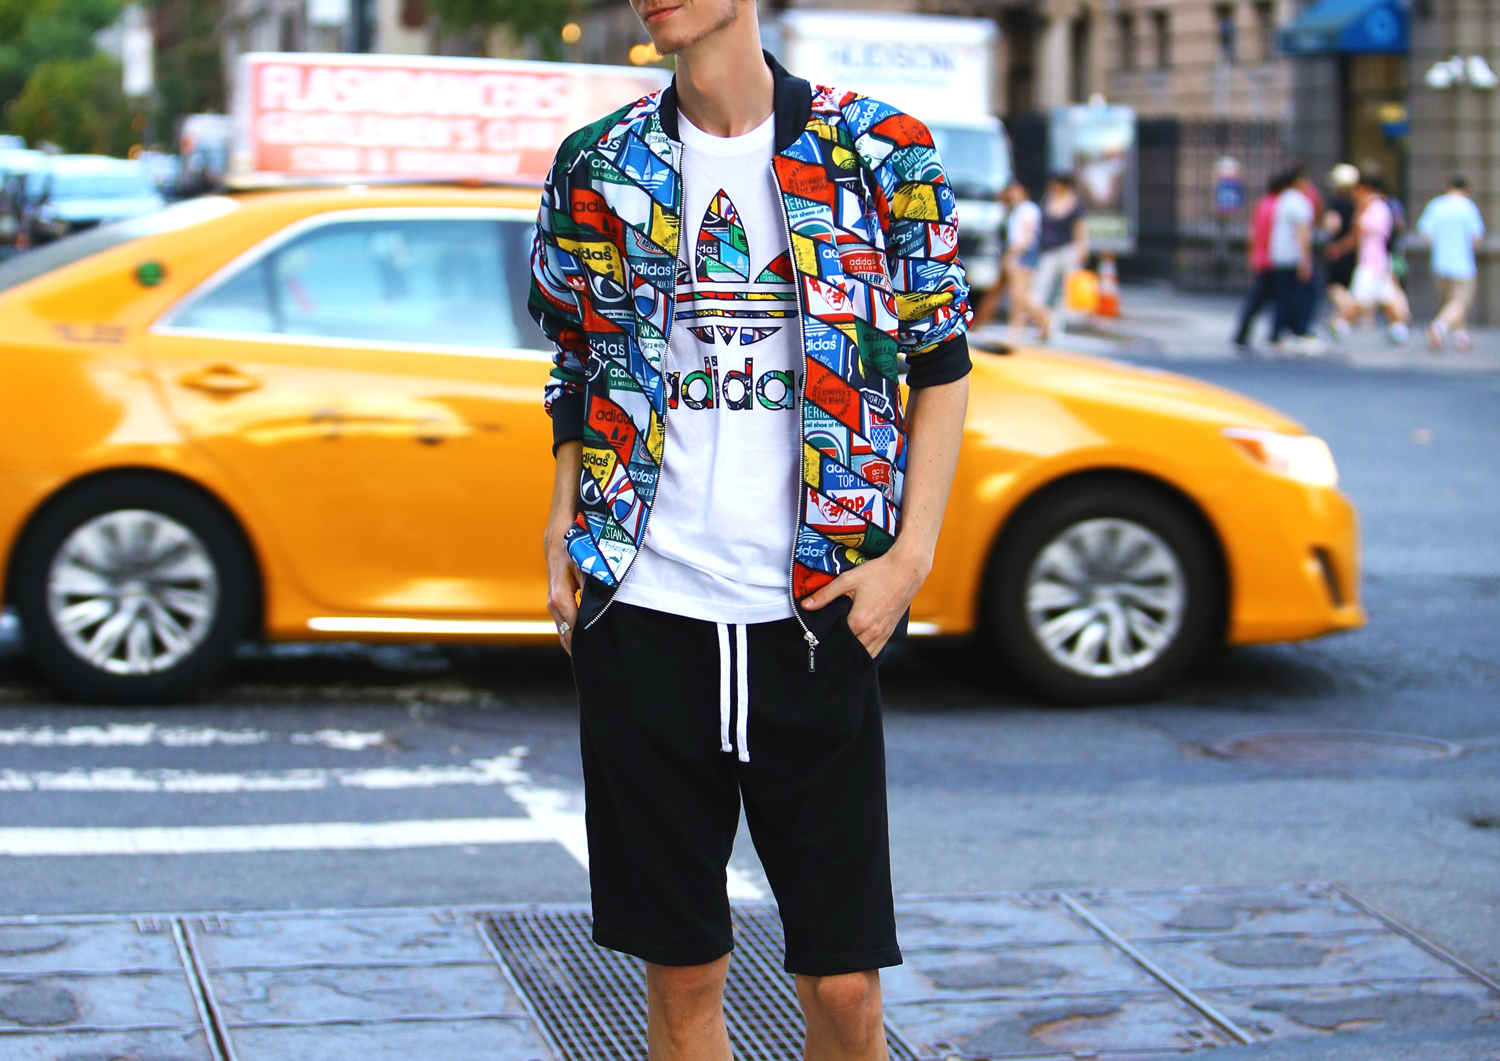 adidasoriginal-ferfi-new-york-fashion-week-magyar-ferfidivat-stan-smith-sneakers-smizedivat-chaby-outfit_3.png